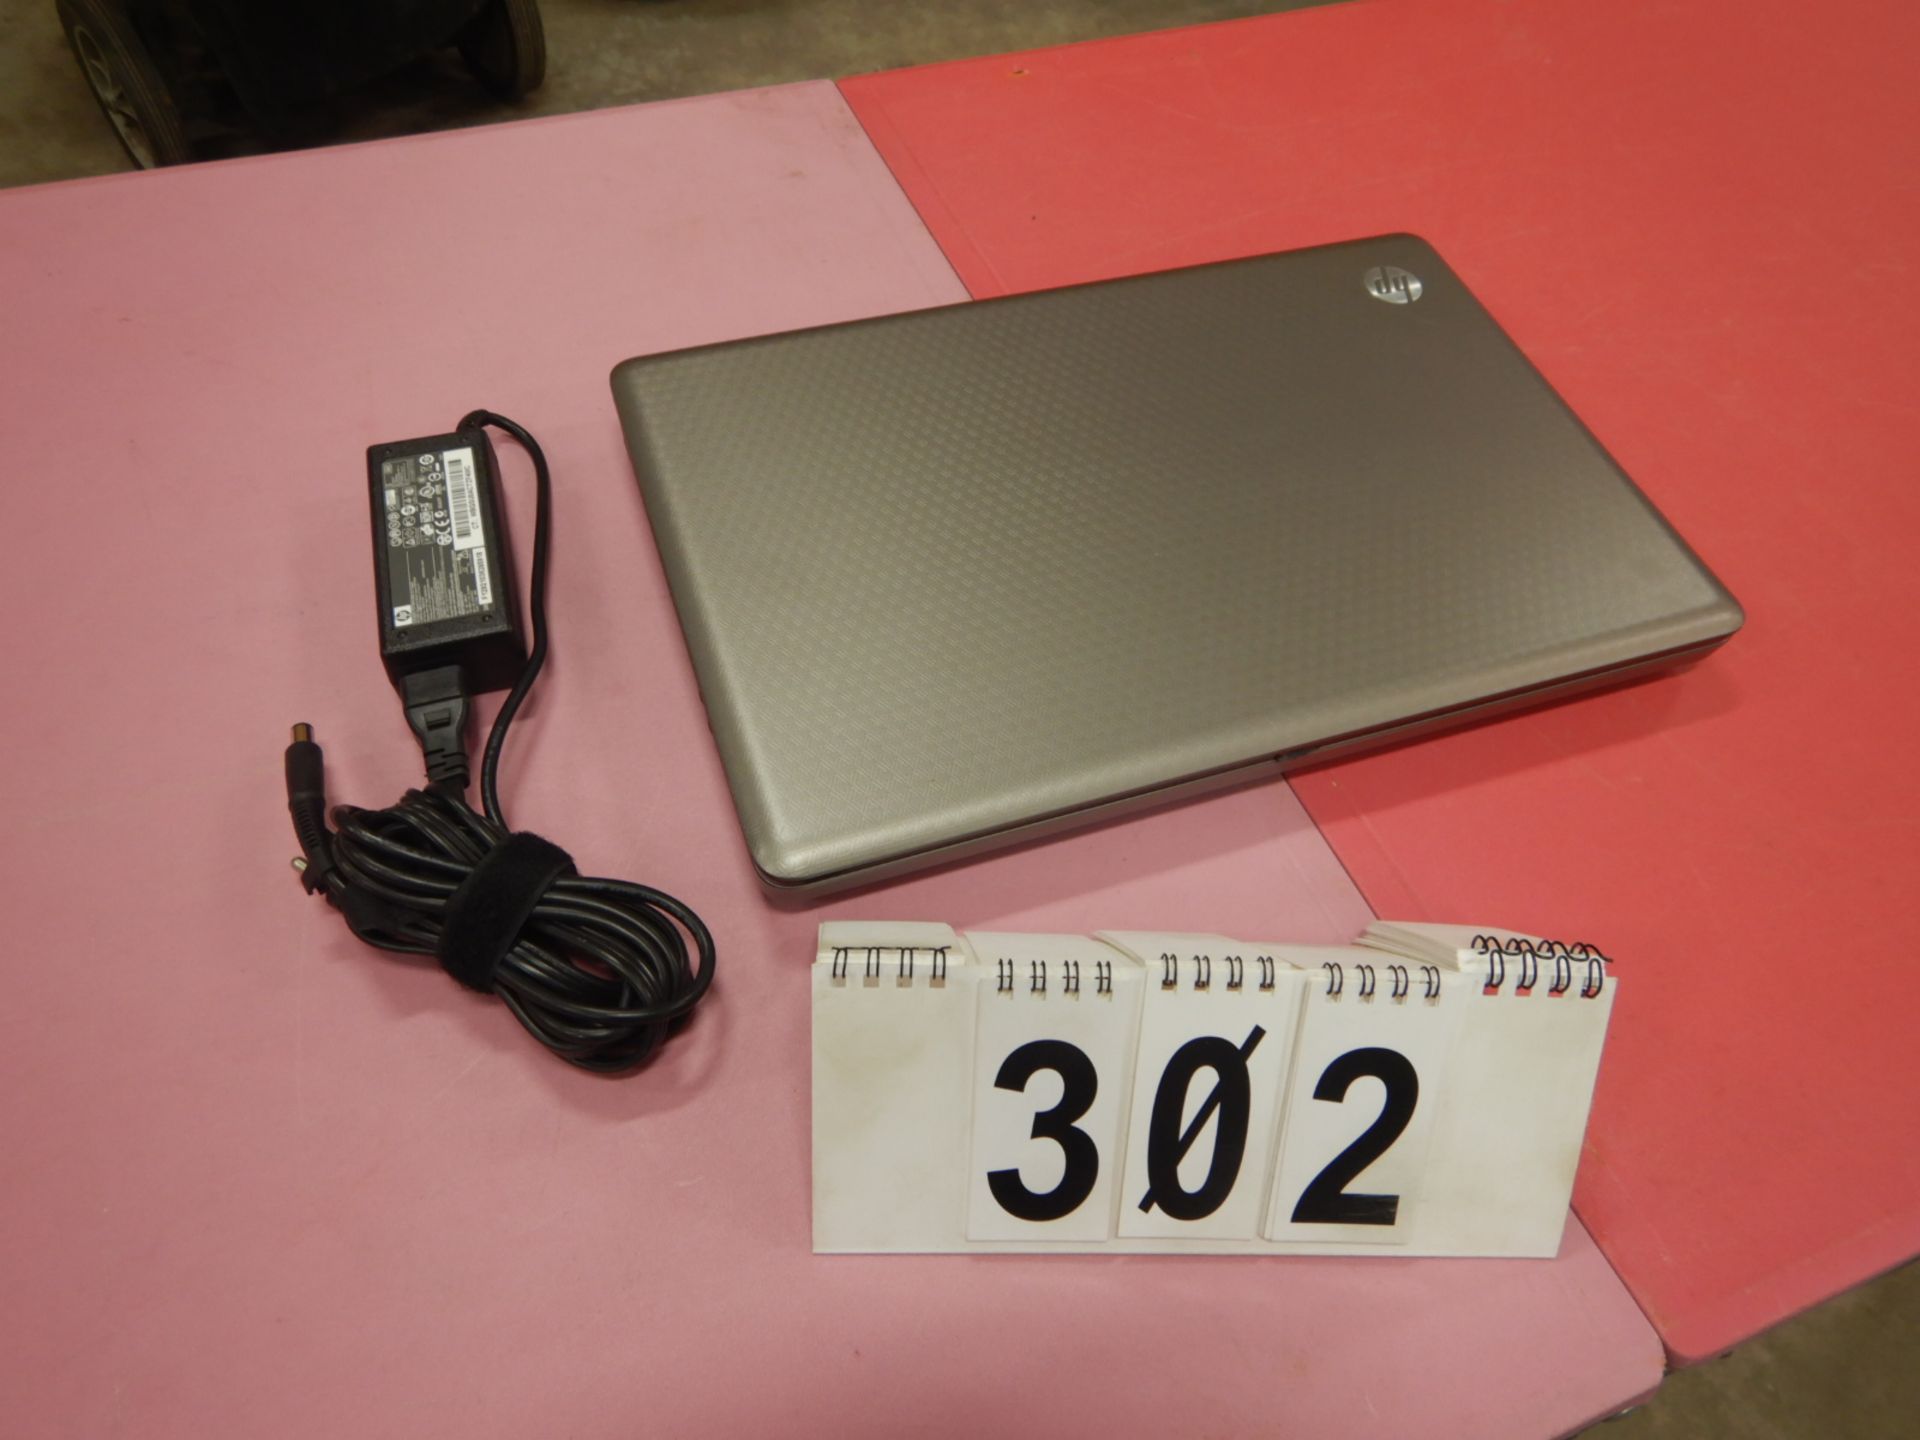 HP LAPTOP W/ CHARGING CORD - A51 - Image 2 of 2